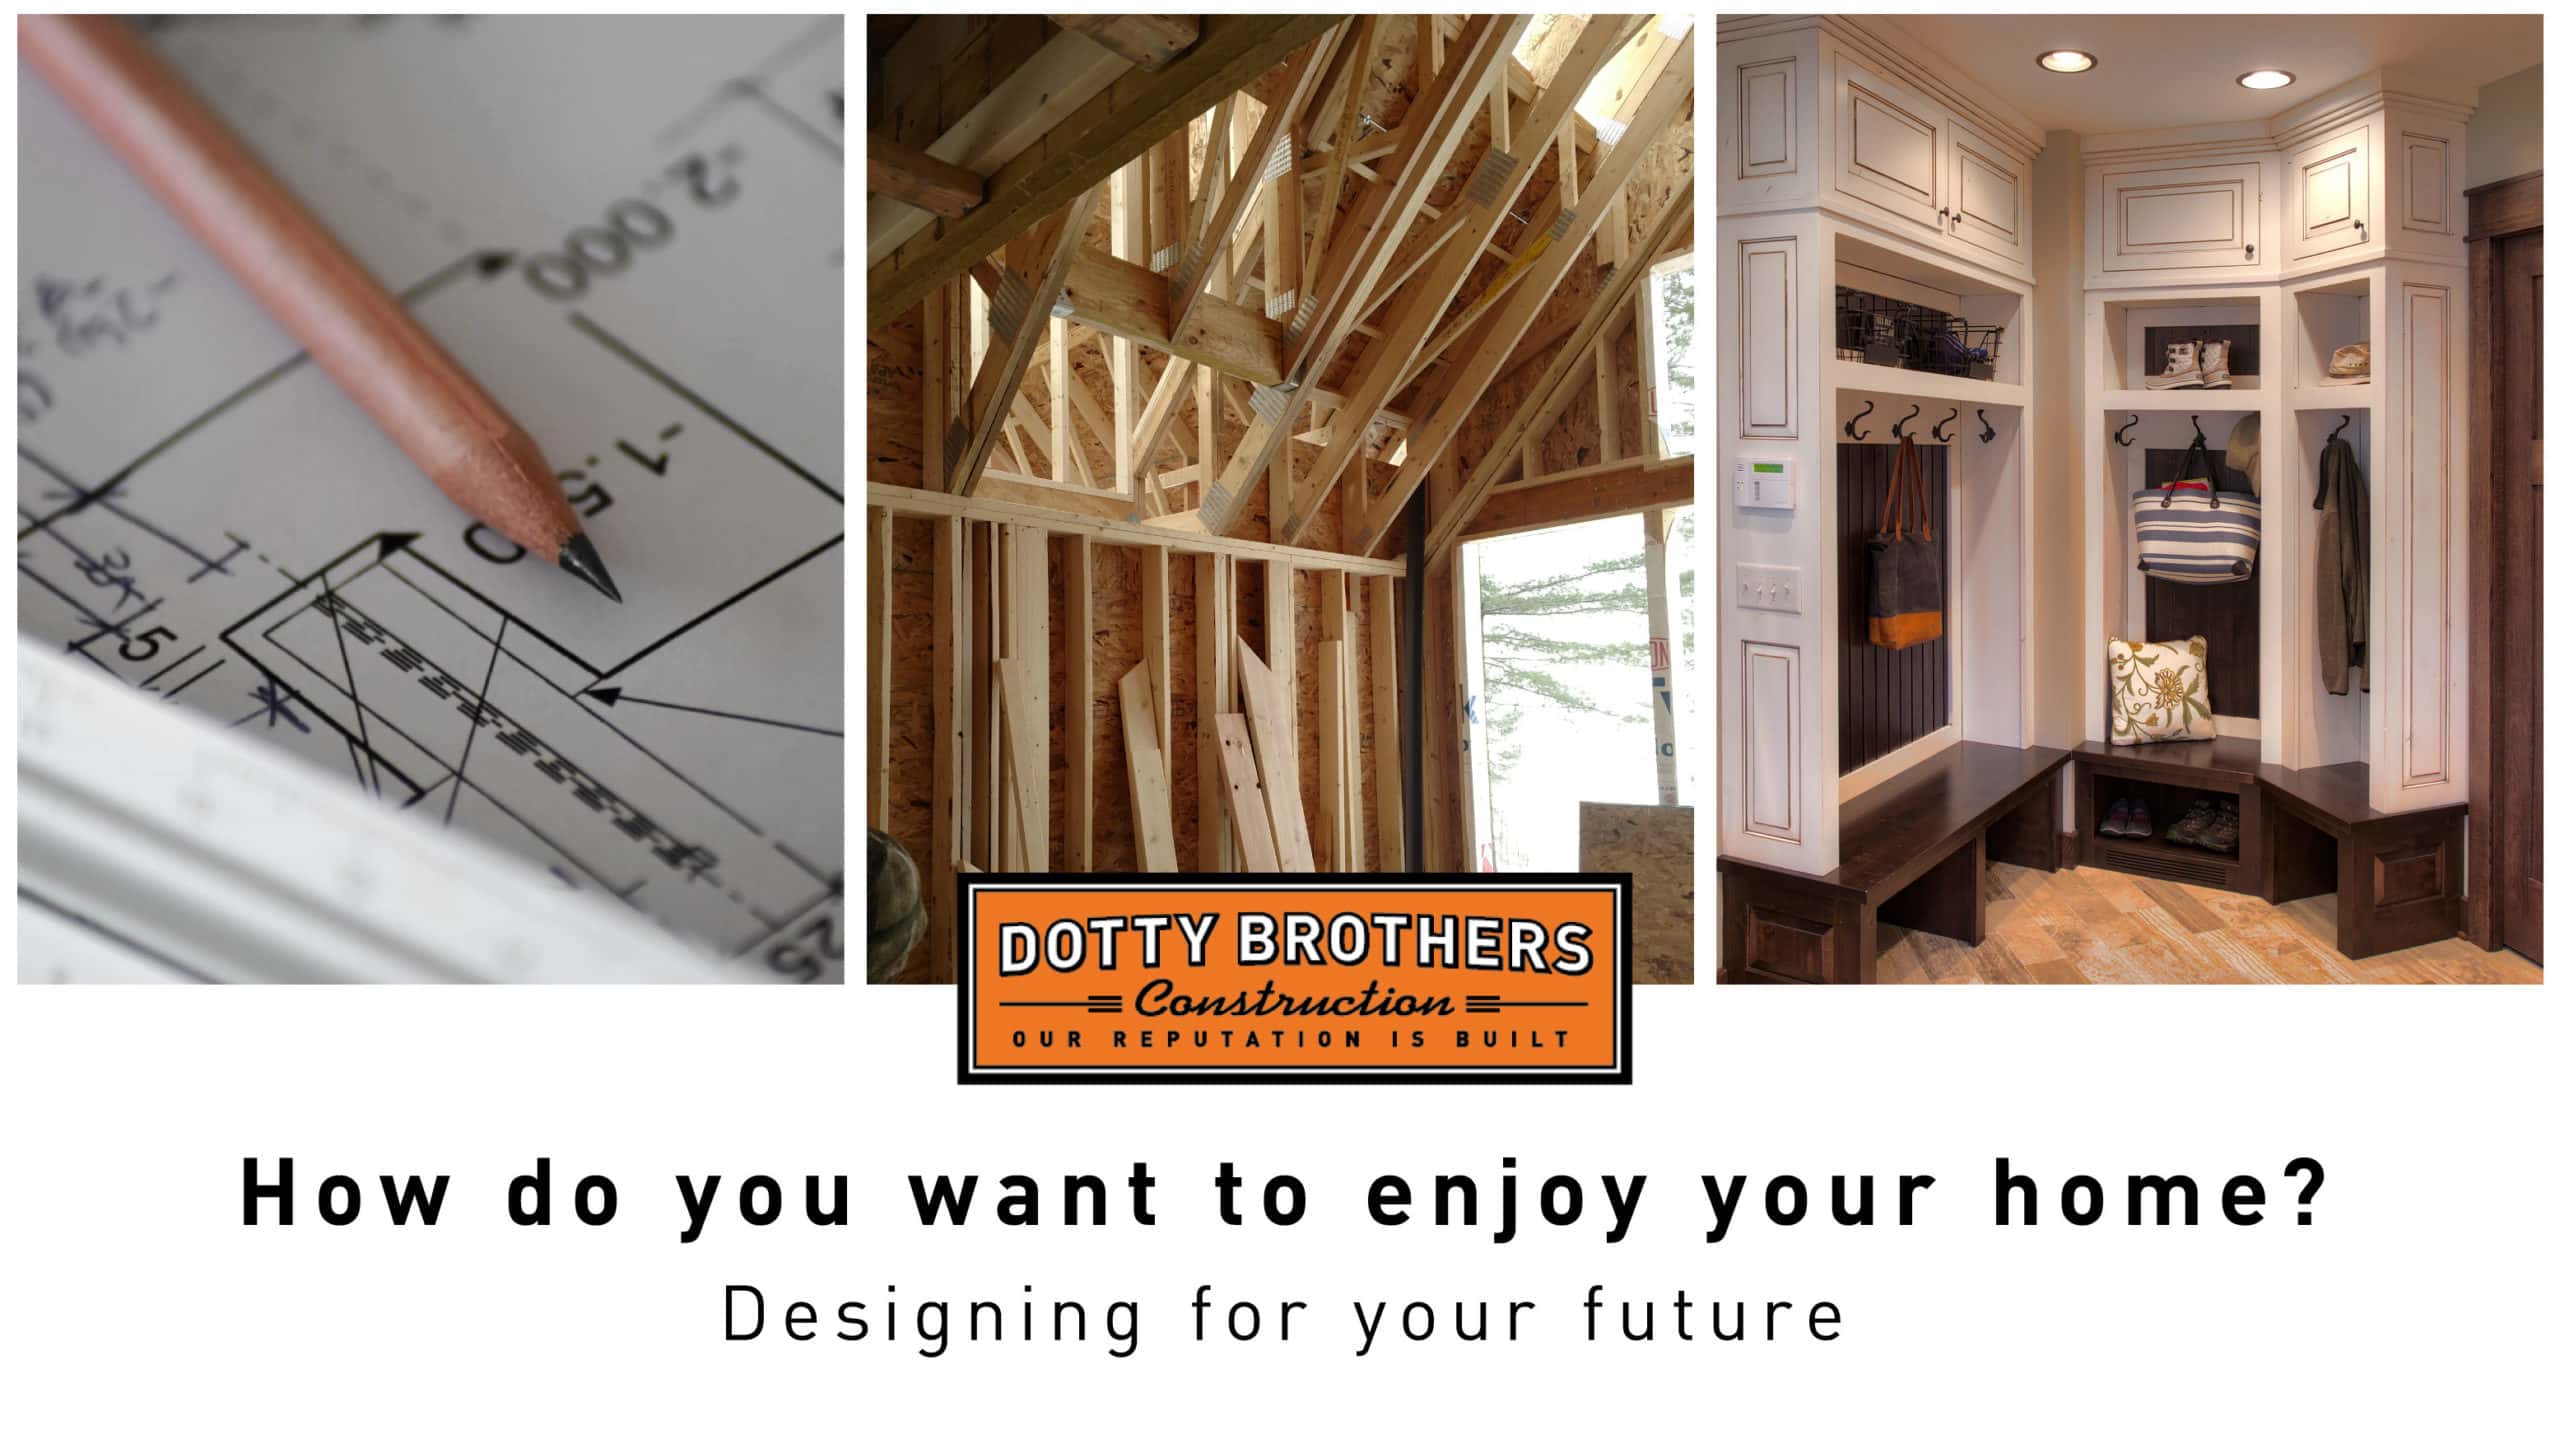 Designing your home